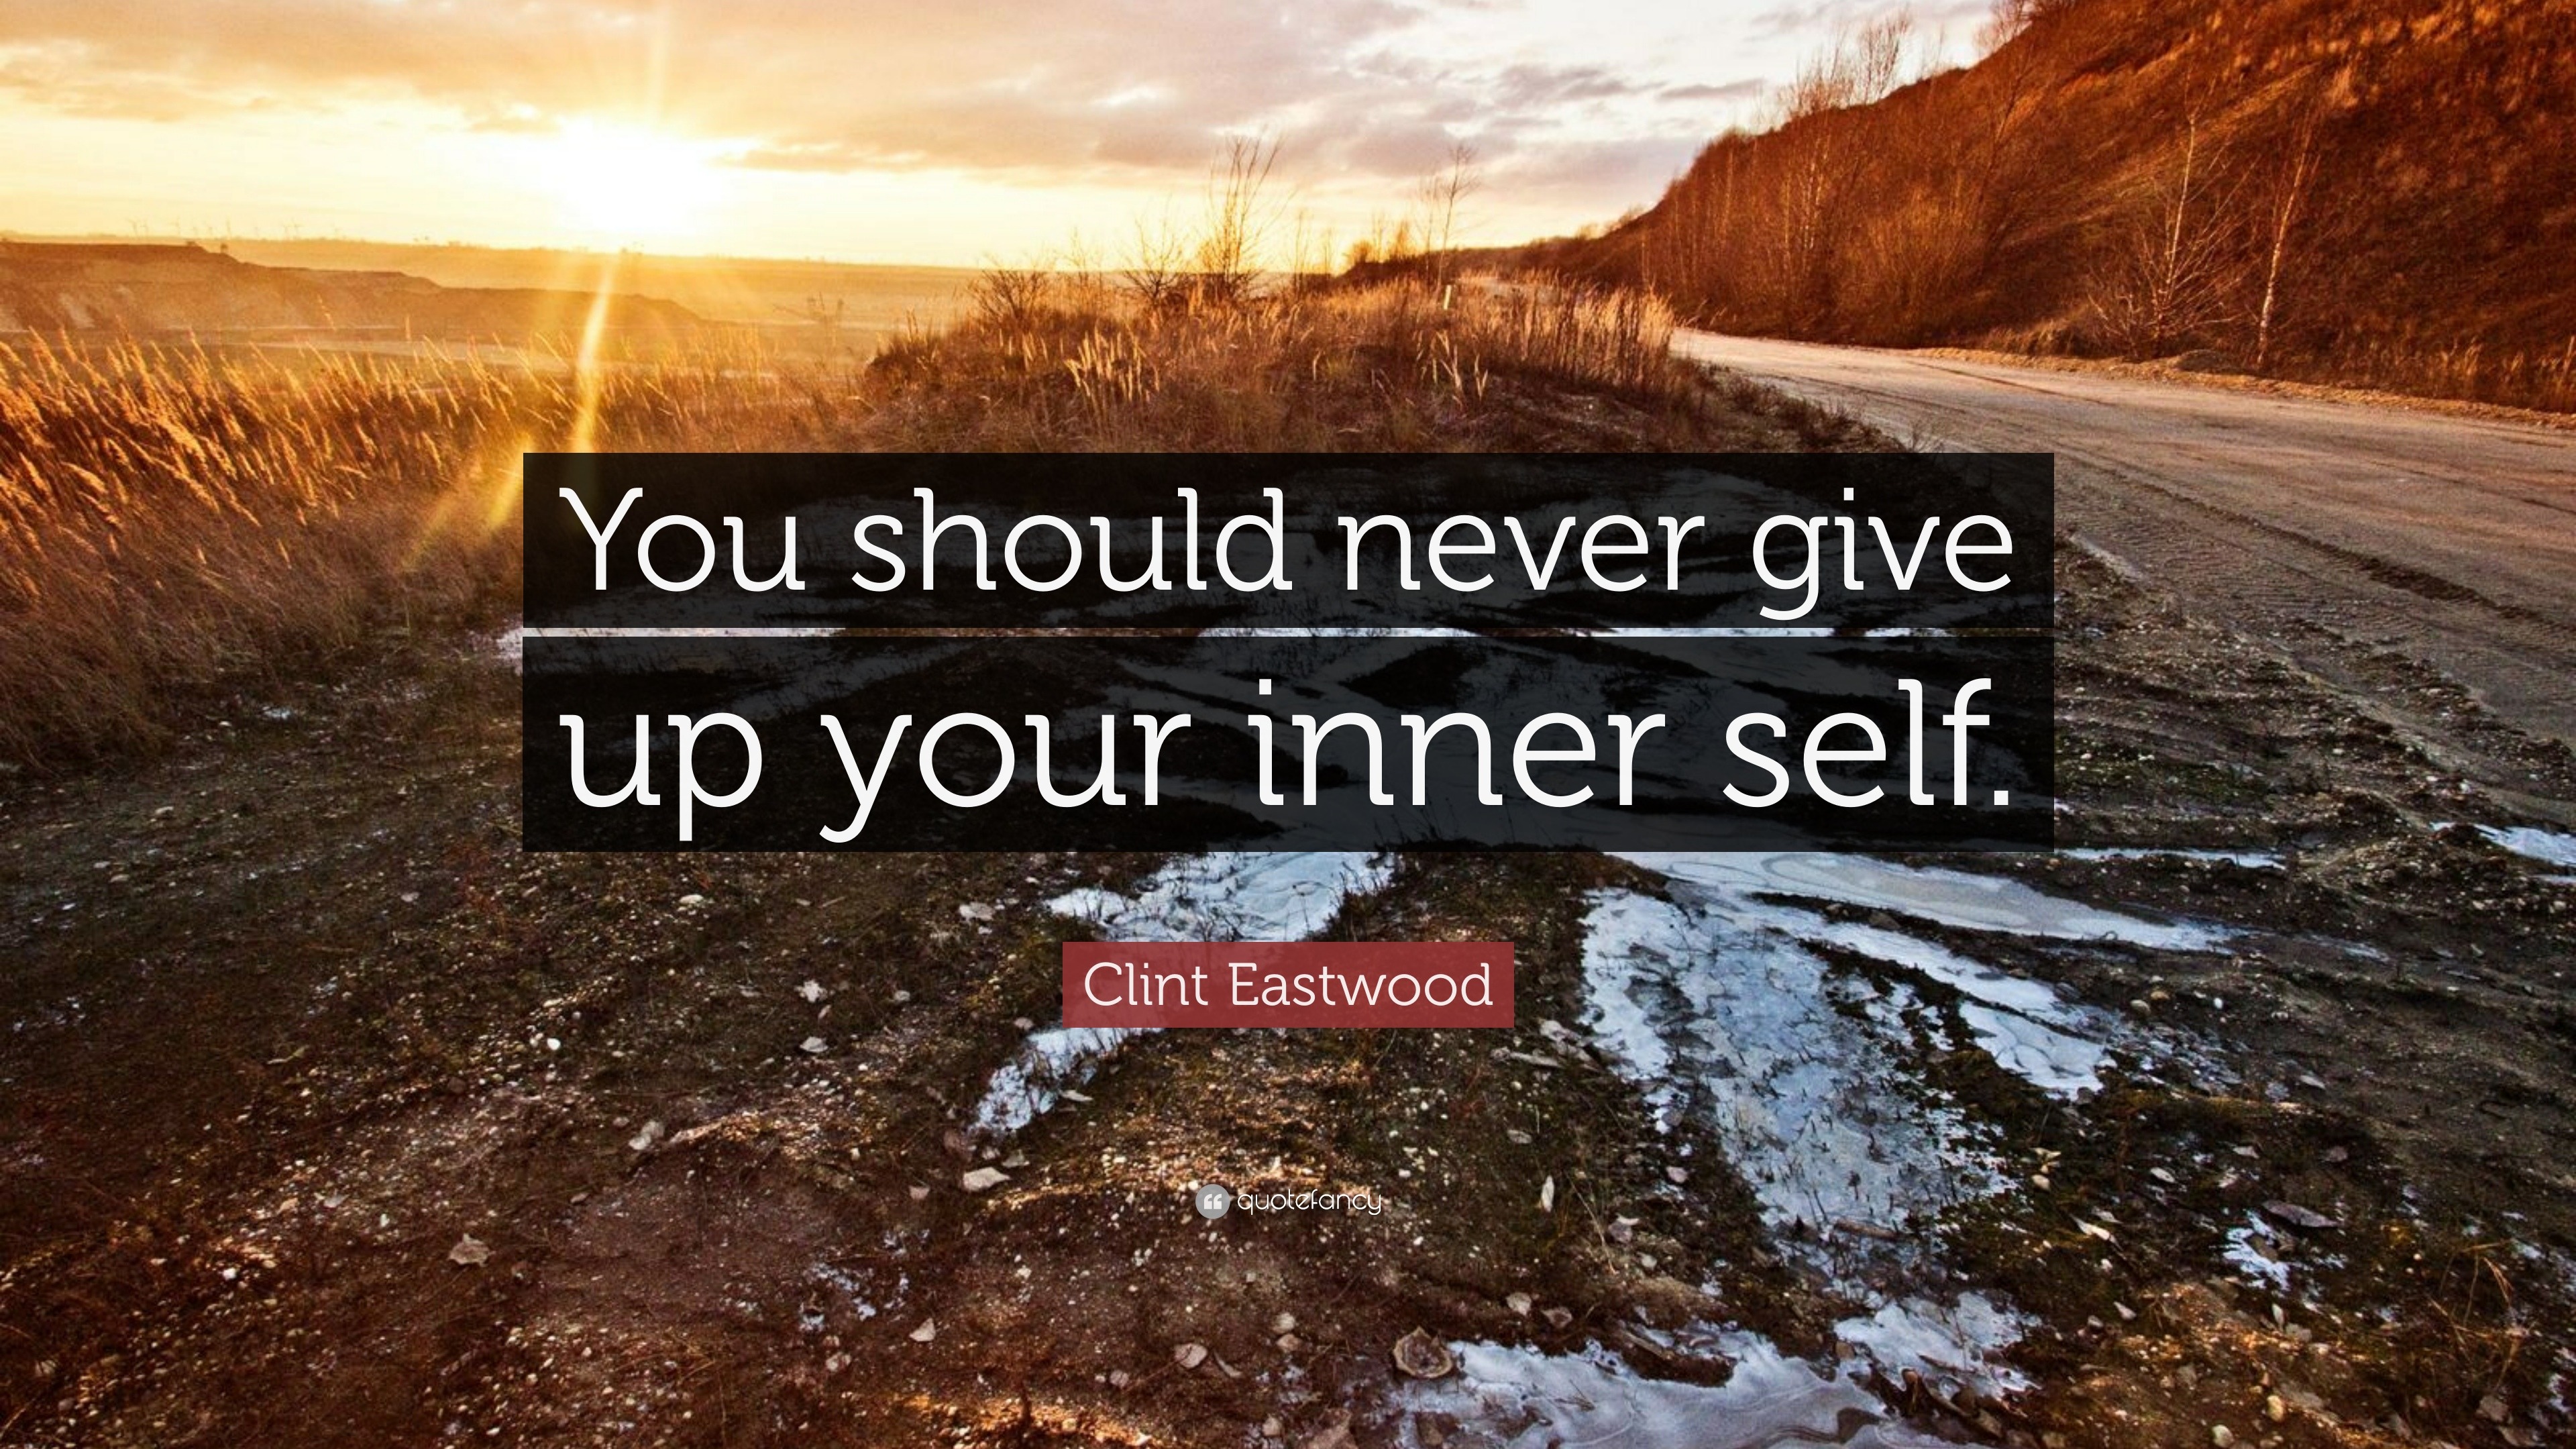 Clint Eastwood Quote: “You should never give up your inner self.”